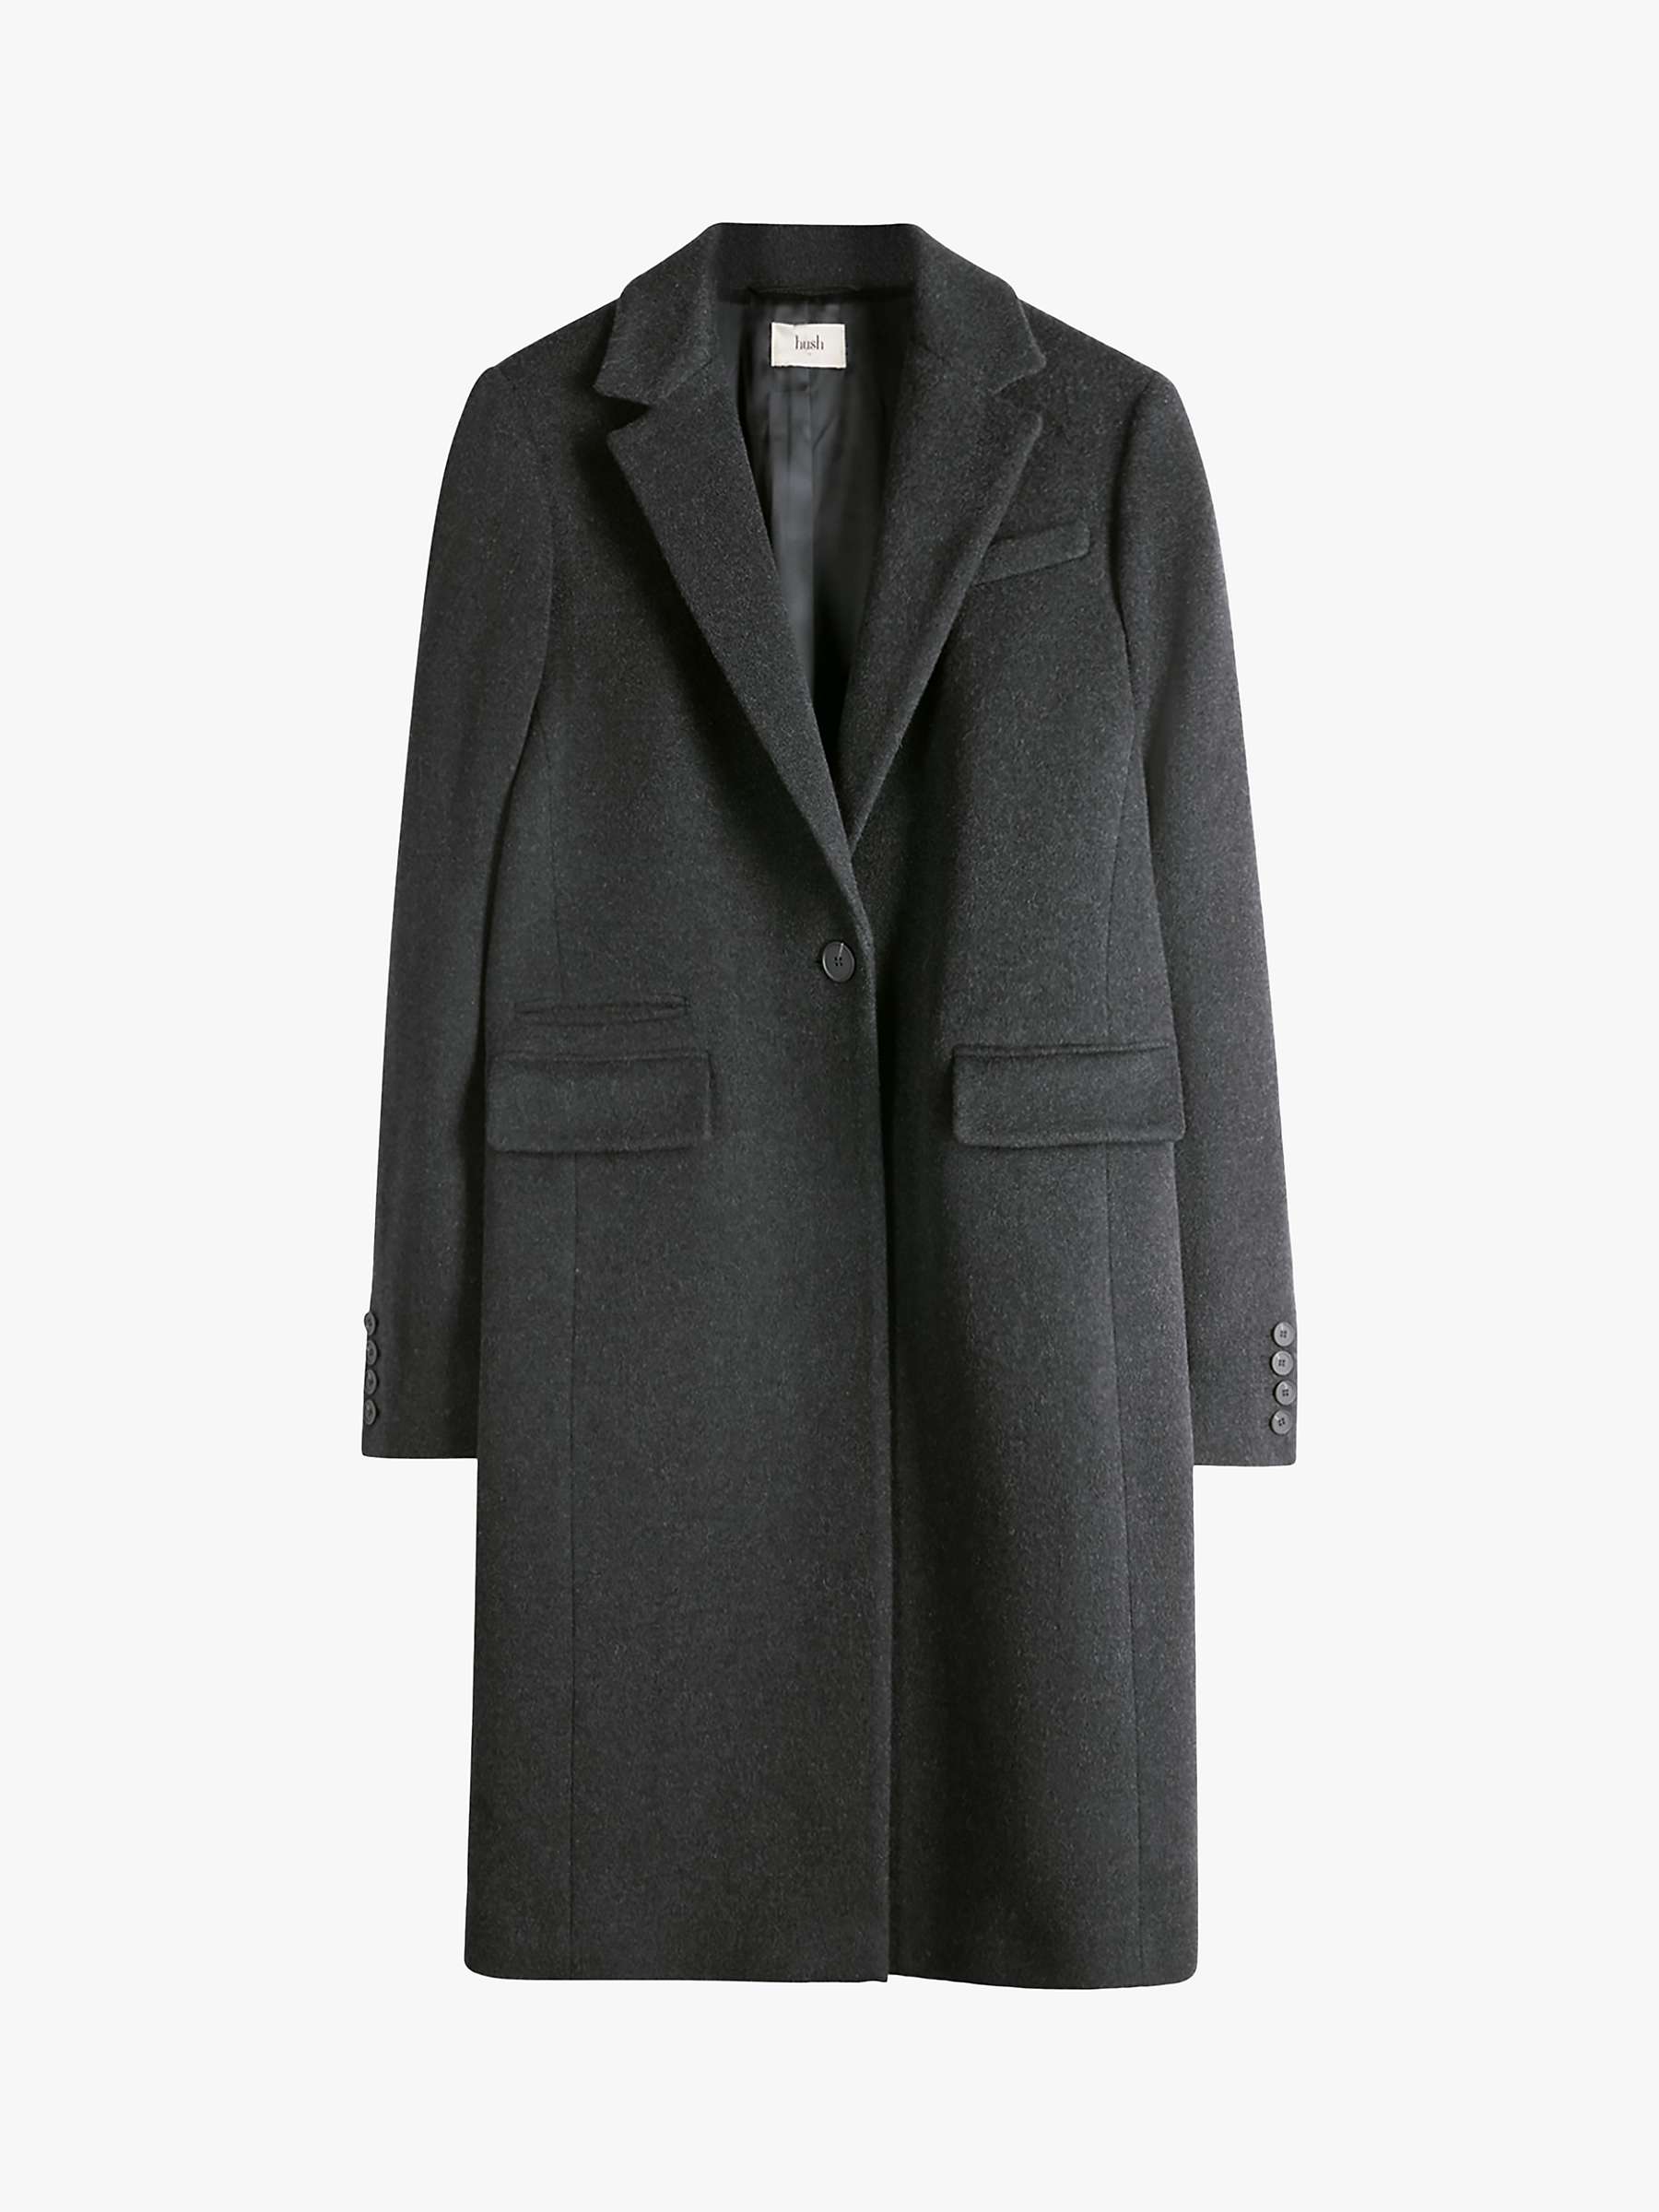 hush Paige Wool and Cashmere Blend Coat, Charcoal at John Lewis & Partners